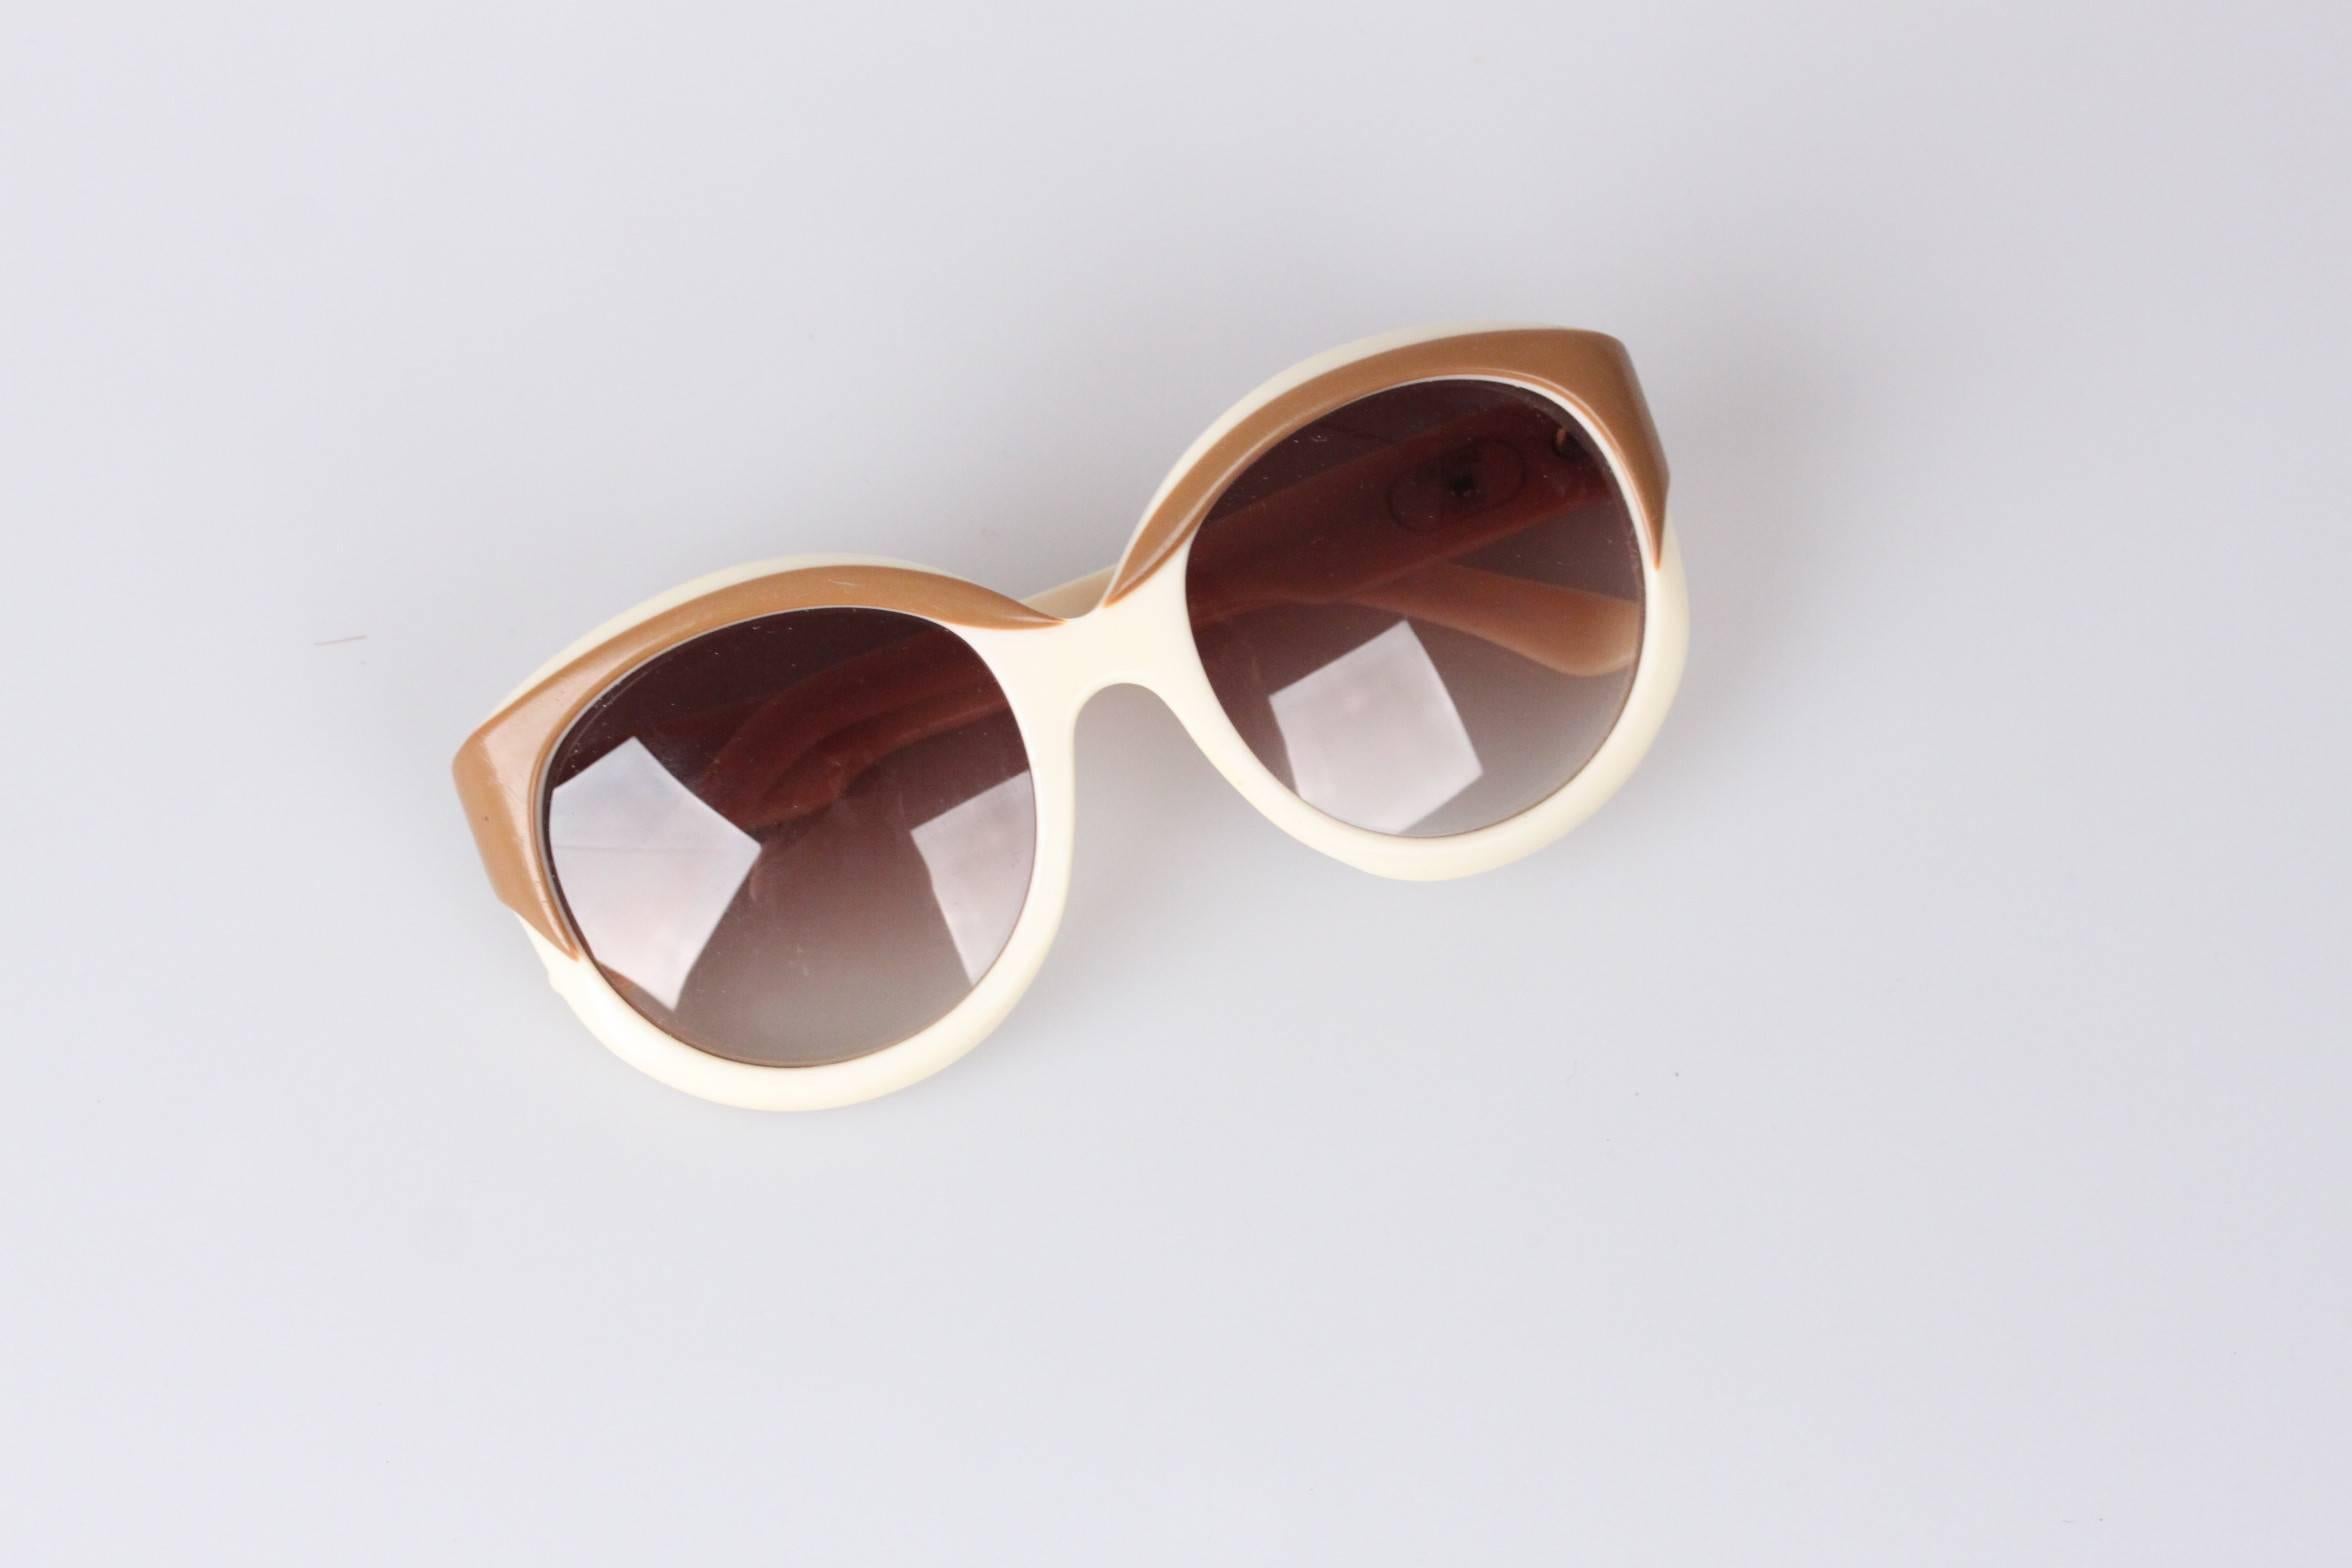 Beautiful pair of vintage Céline Paris sunglasses dating to the mid to late 1970s. Oversized Round shaped frame with replaced gradient brown lenses, complimenting the two tone coloured frame. Distinctive gold engraved logo Céline horse carriage on